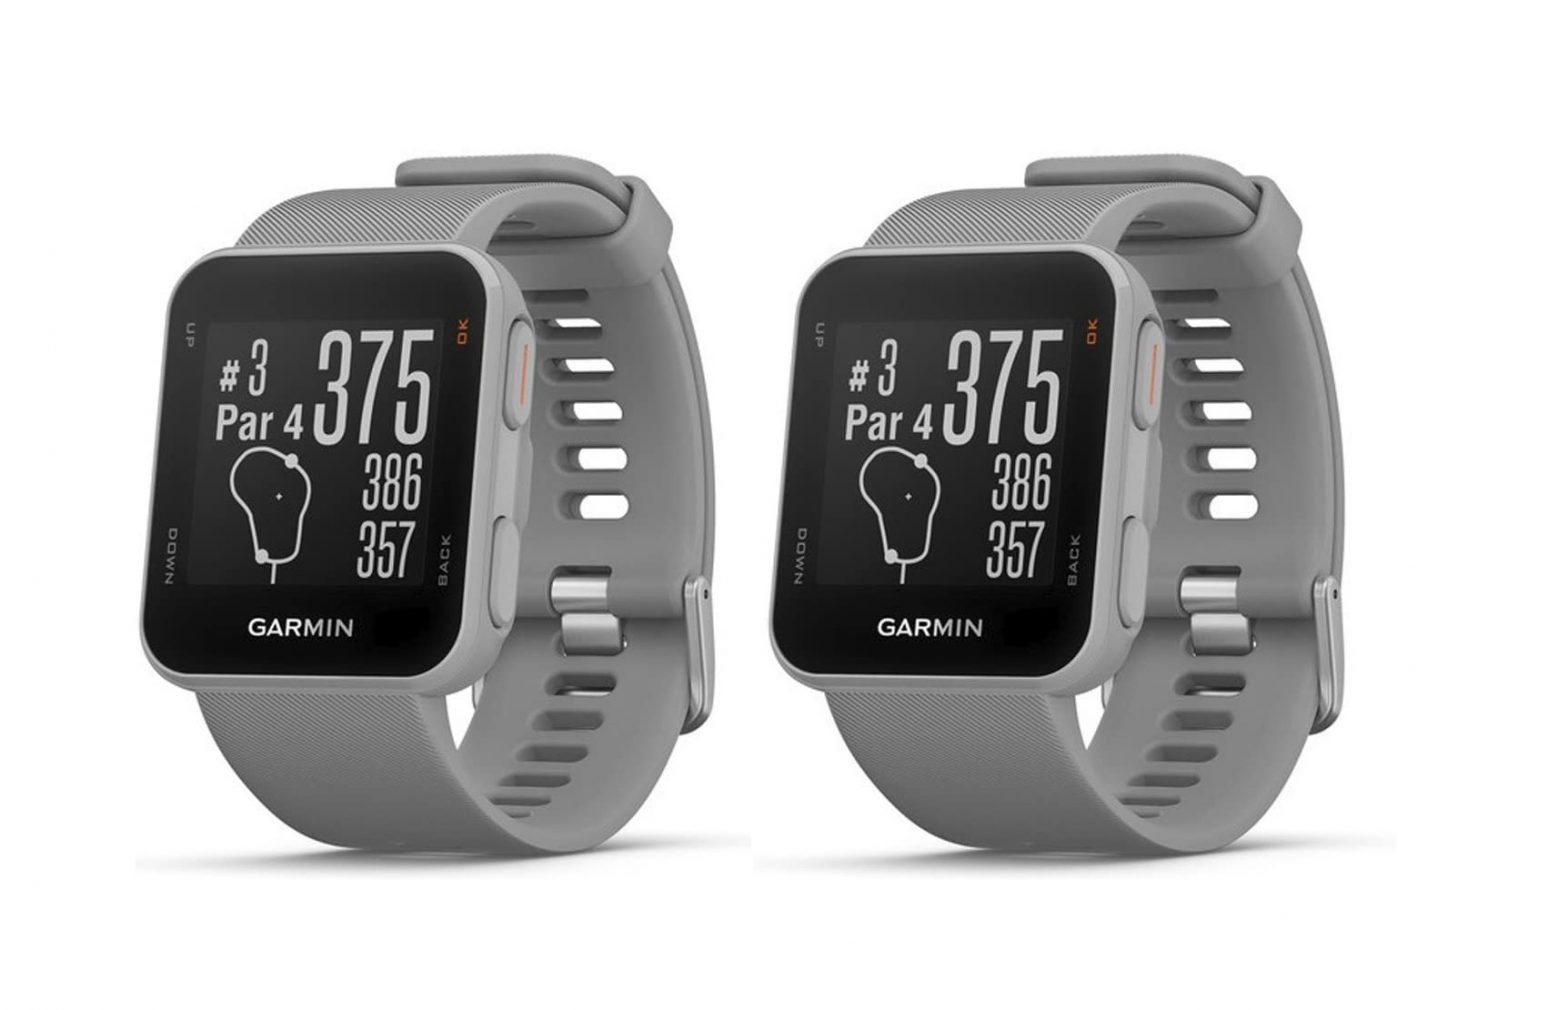 GARMIN APPROACH S10 Smartwatch Owner's Manual - Manualsee